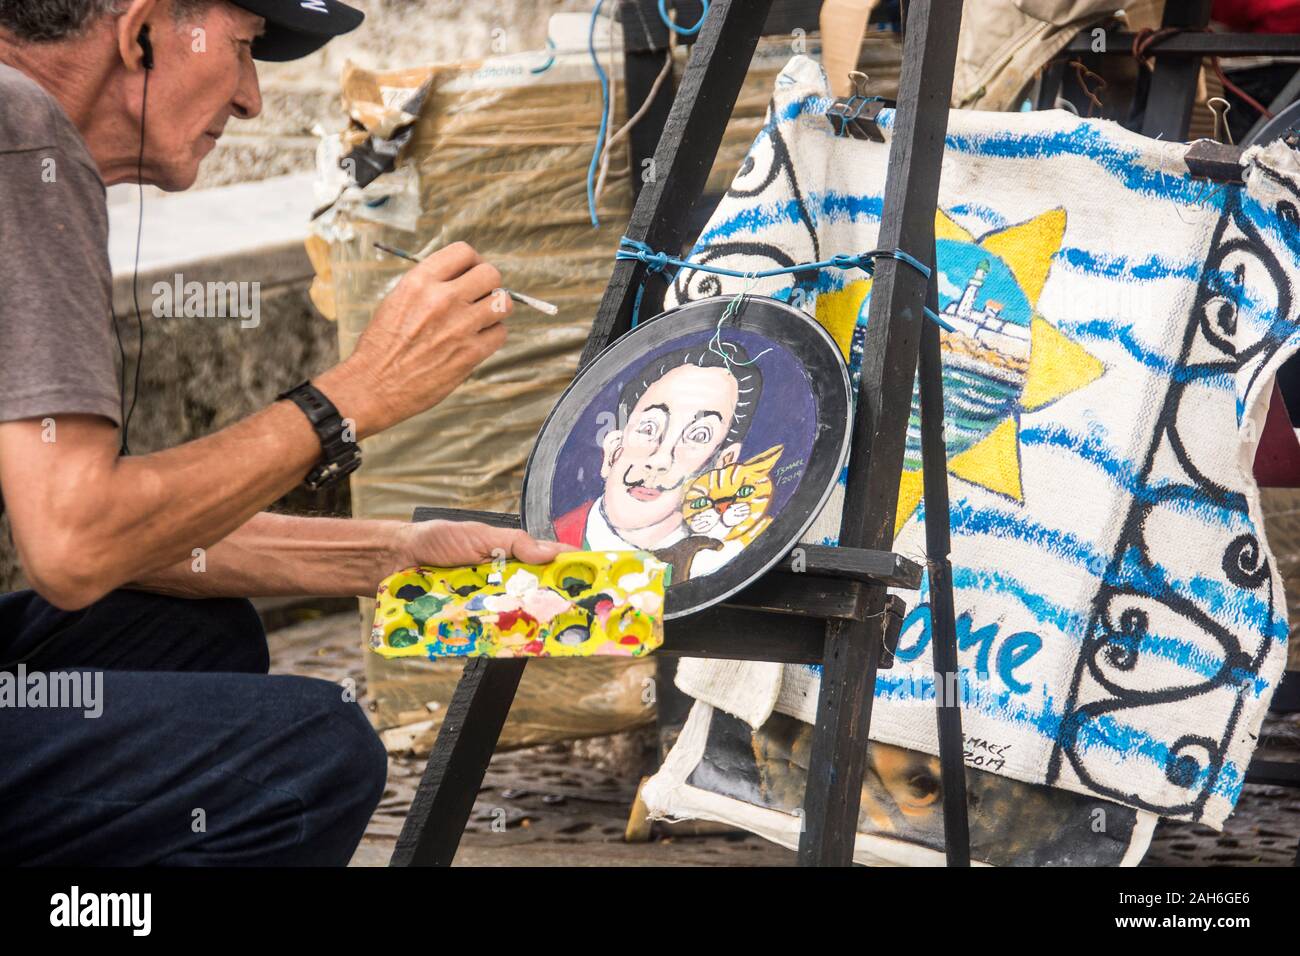 People of Havana Series - A Cuban artist painting a plate. Stock Photo